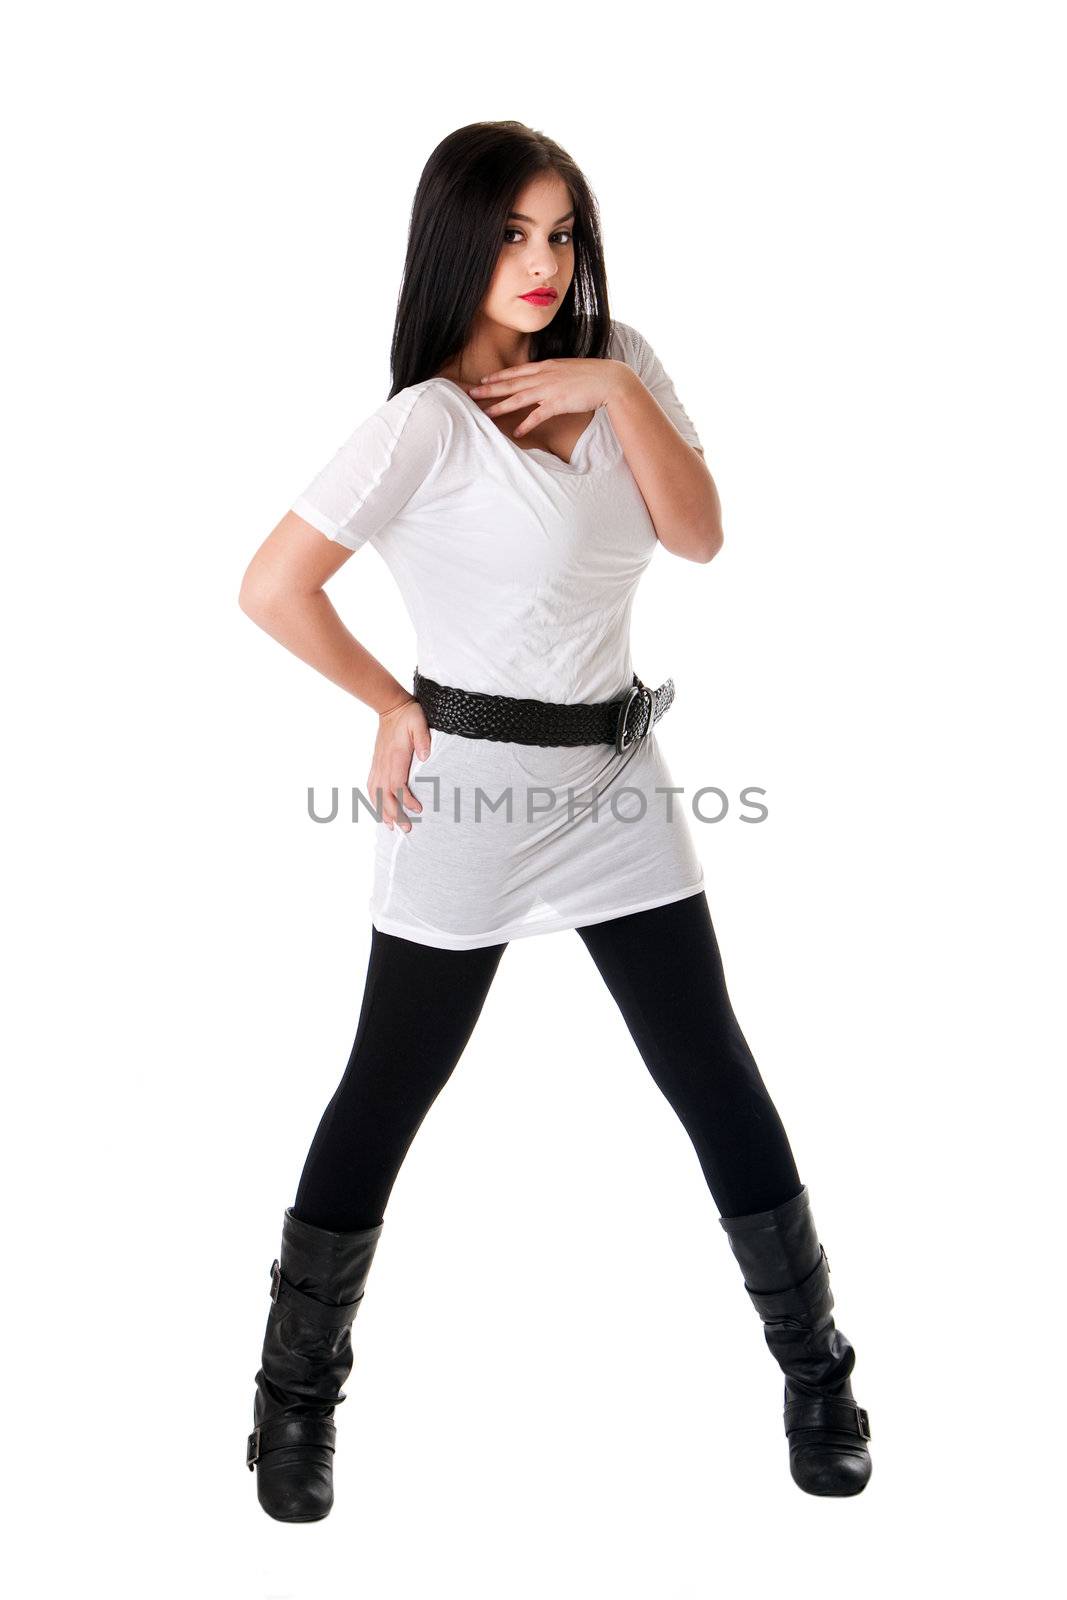 Beautiful brunette Caucasian Hispanic Latina woman with red lipstick standing with legs spread, wearing white shirt, black leggings and belt, isolated.